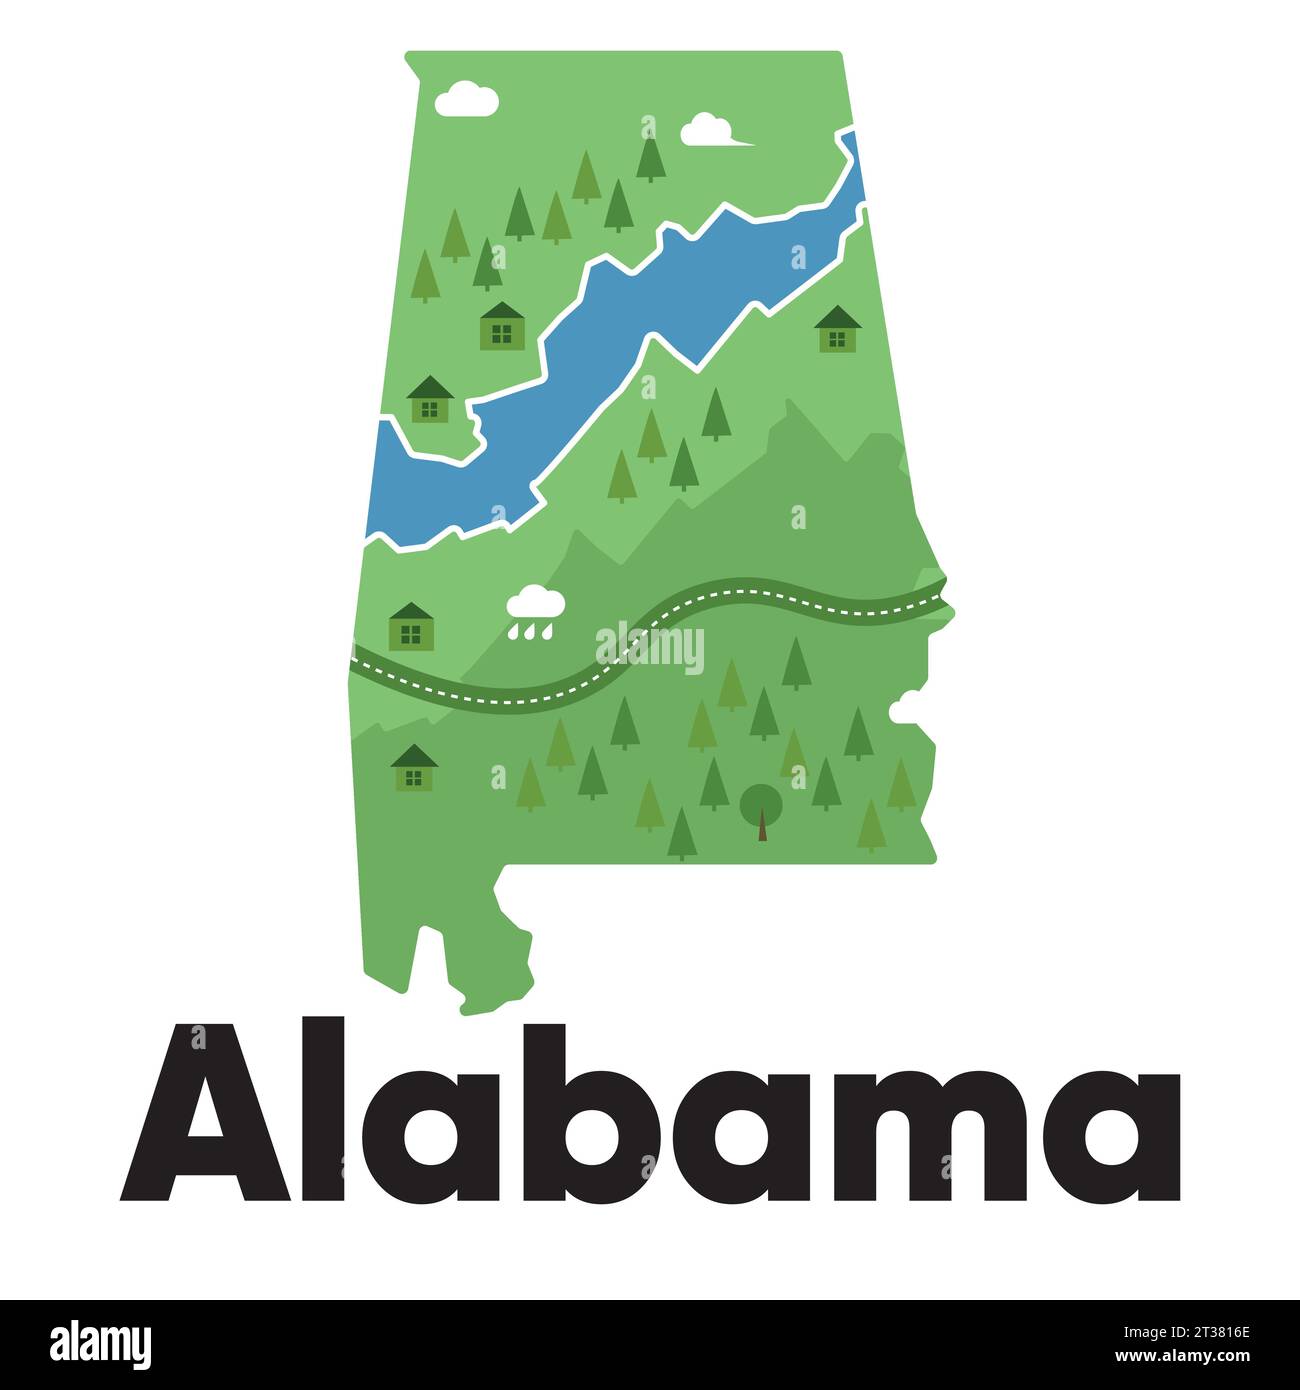 Alabama map drawing illustration cartoon style natural graphic forest Stock Vector